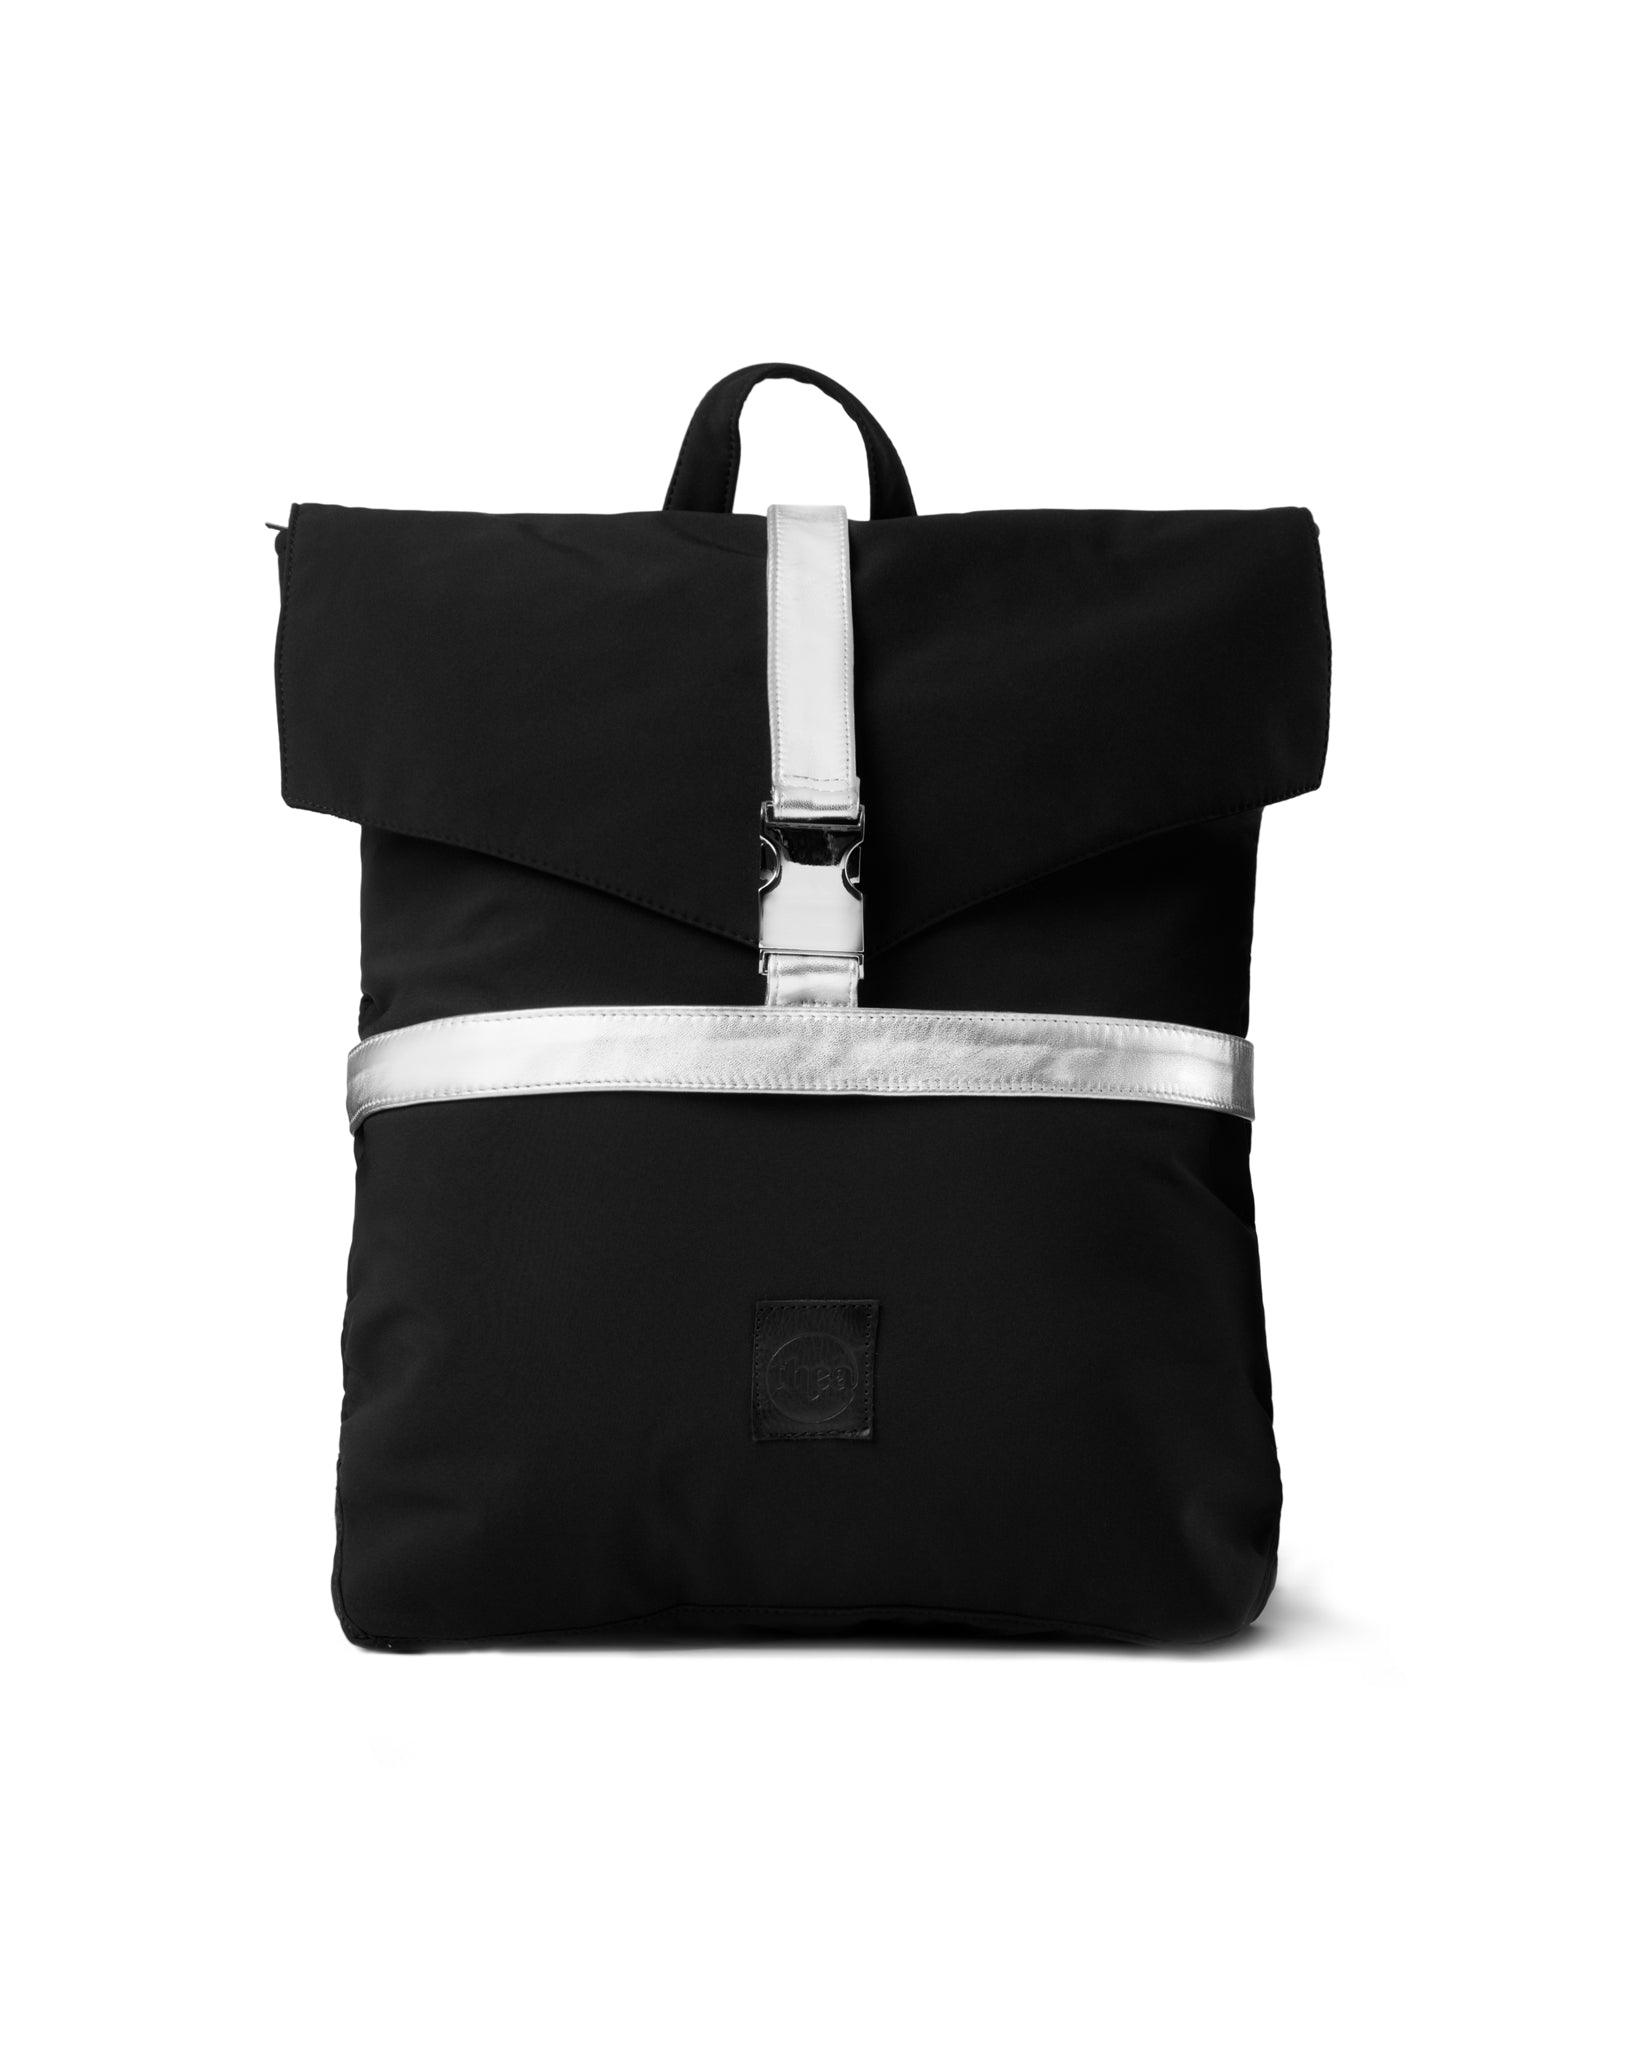 TAME Backpack-Black-Silver - theabags